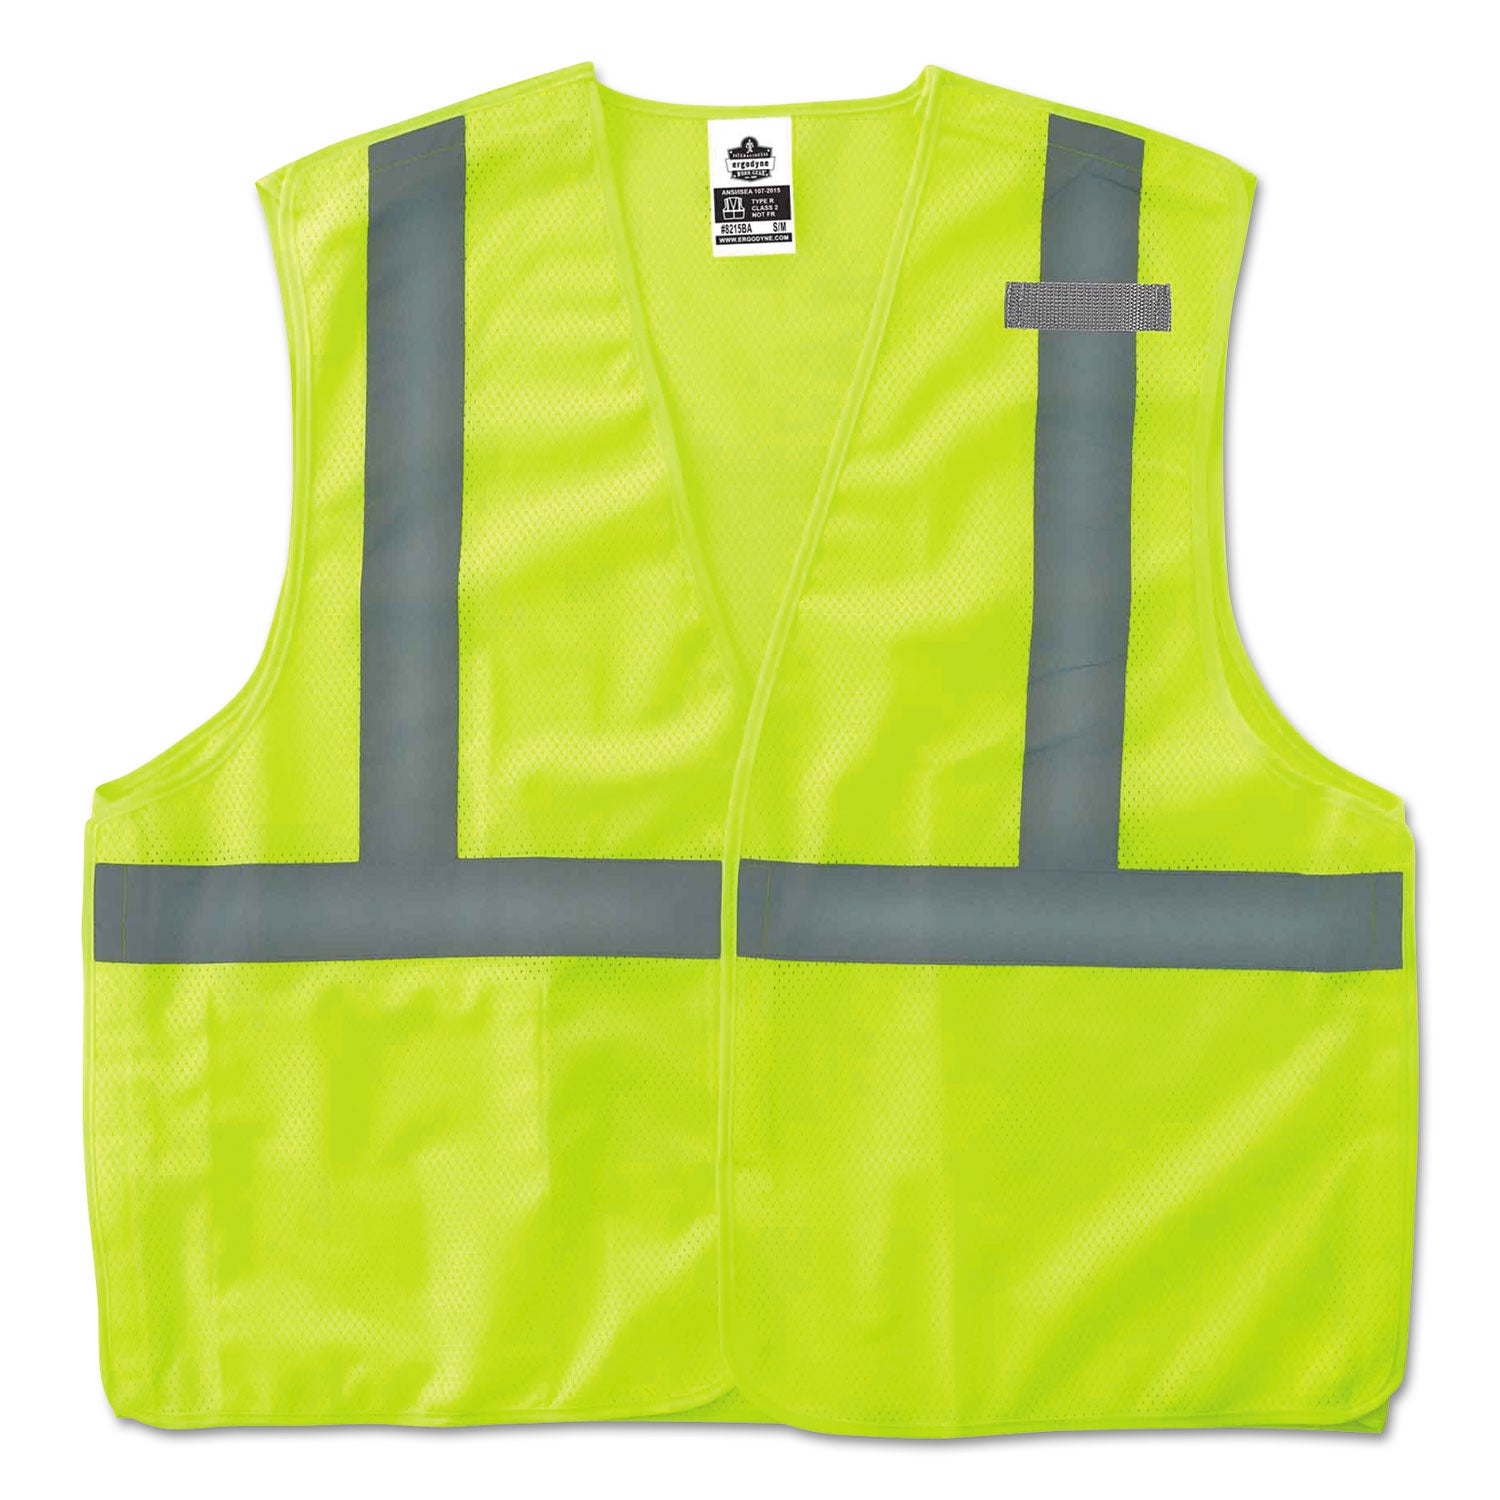 GloWear 8215BA Type R Class 2 Econo Breakaway Mesh Safety Vest, Small to Medium, Lime, Ships in 1-3 Business Days - 